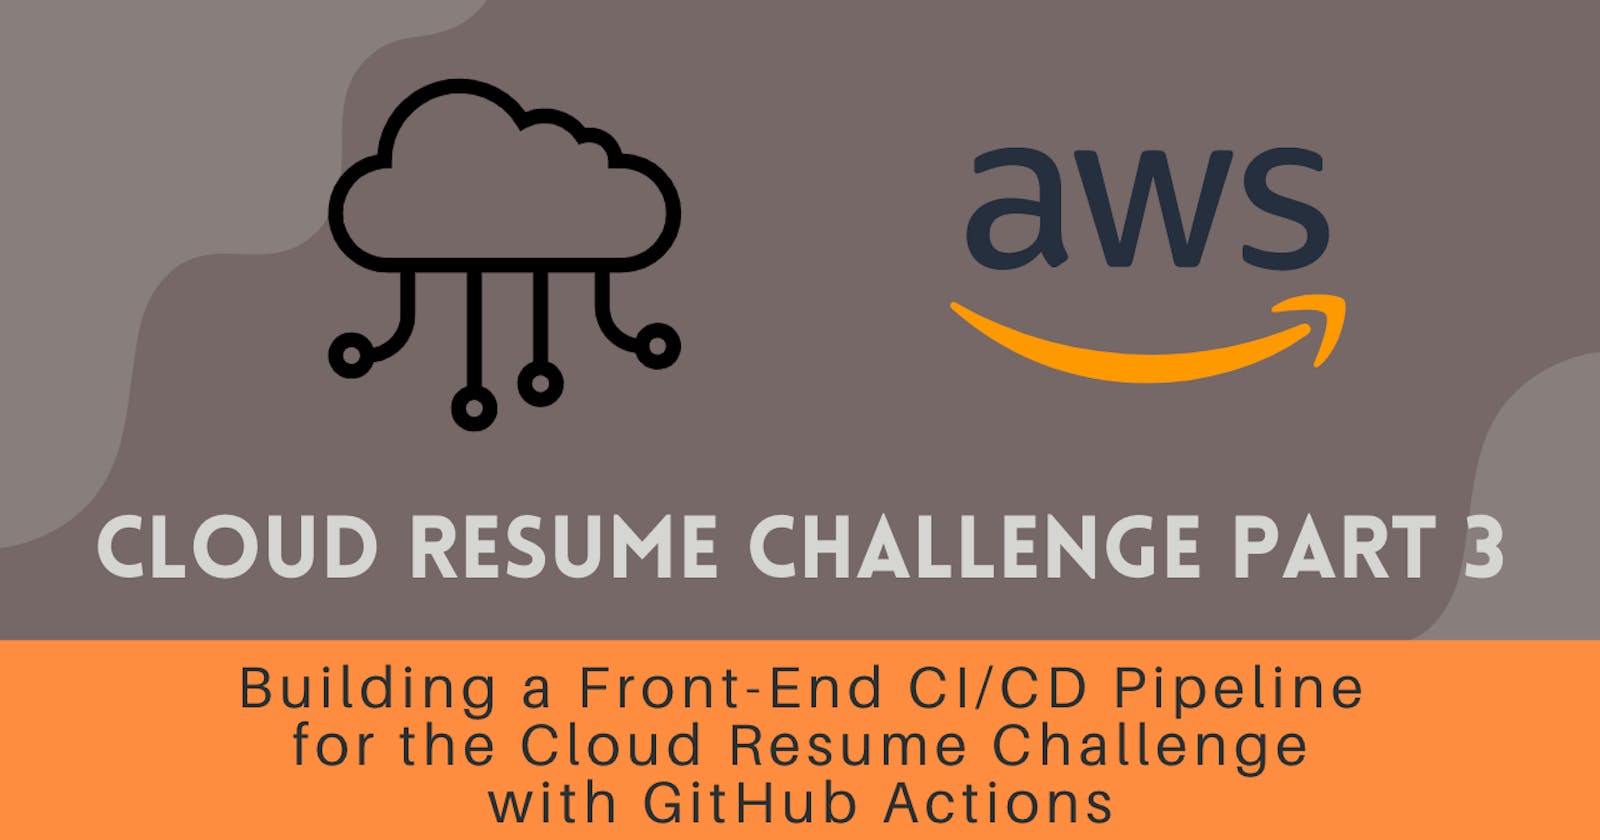 Cloud Resume Challenge Part 3 - Building a Front-End CI/CD Pipeline for the Cloud Resume Challenge with GitHub Actions